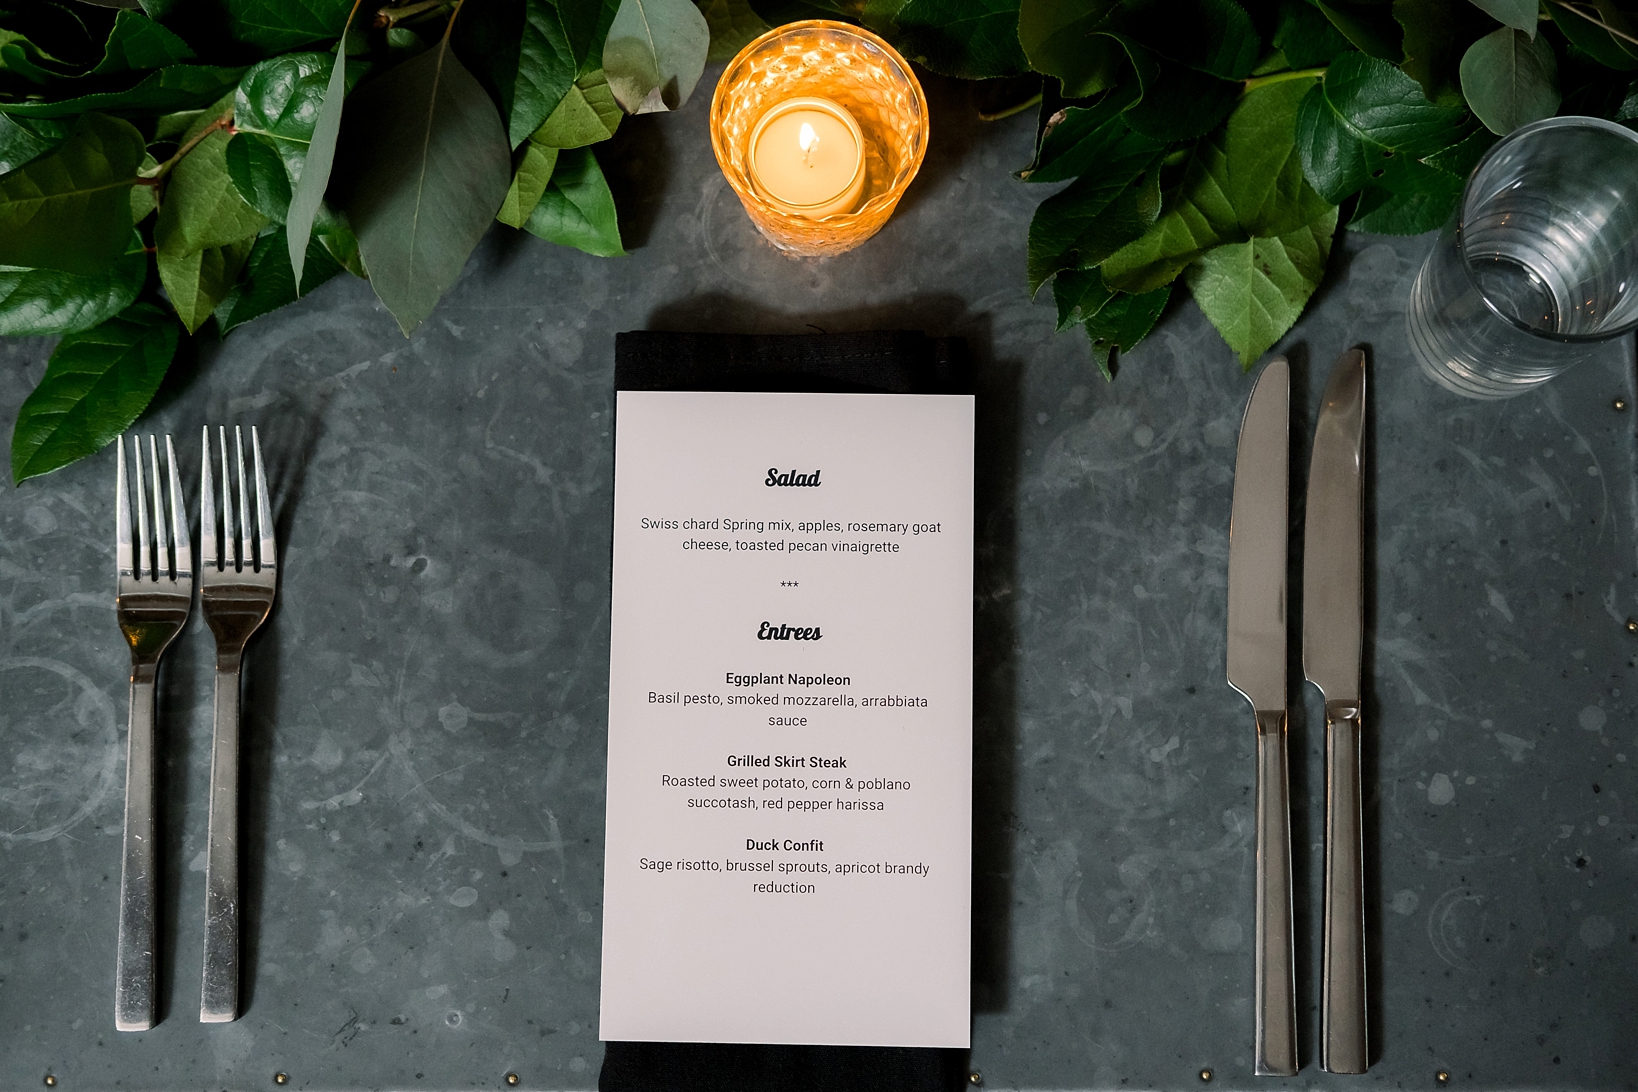 Reception menu and table settings surrounded by simple greeneries and tea lights